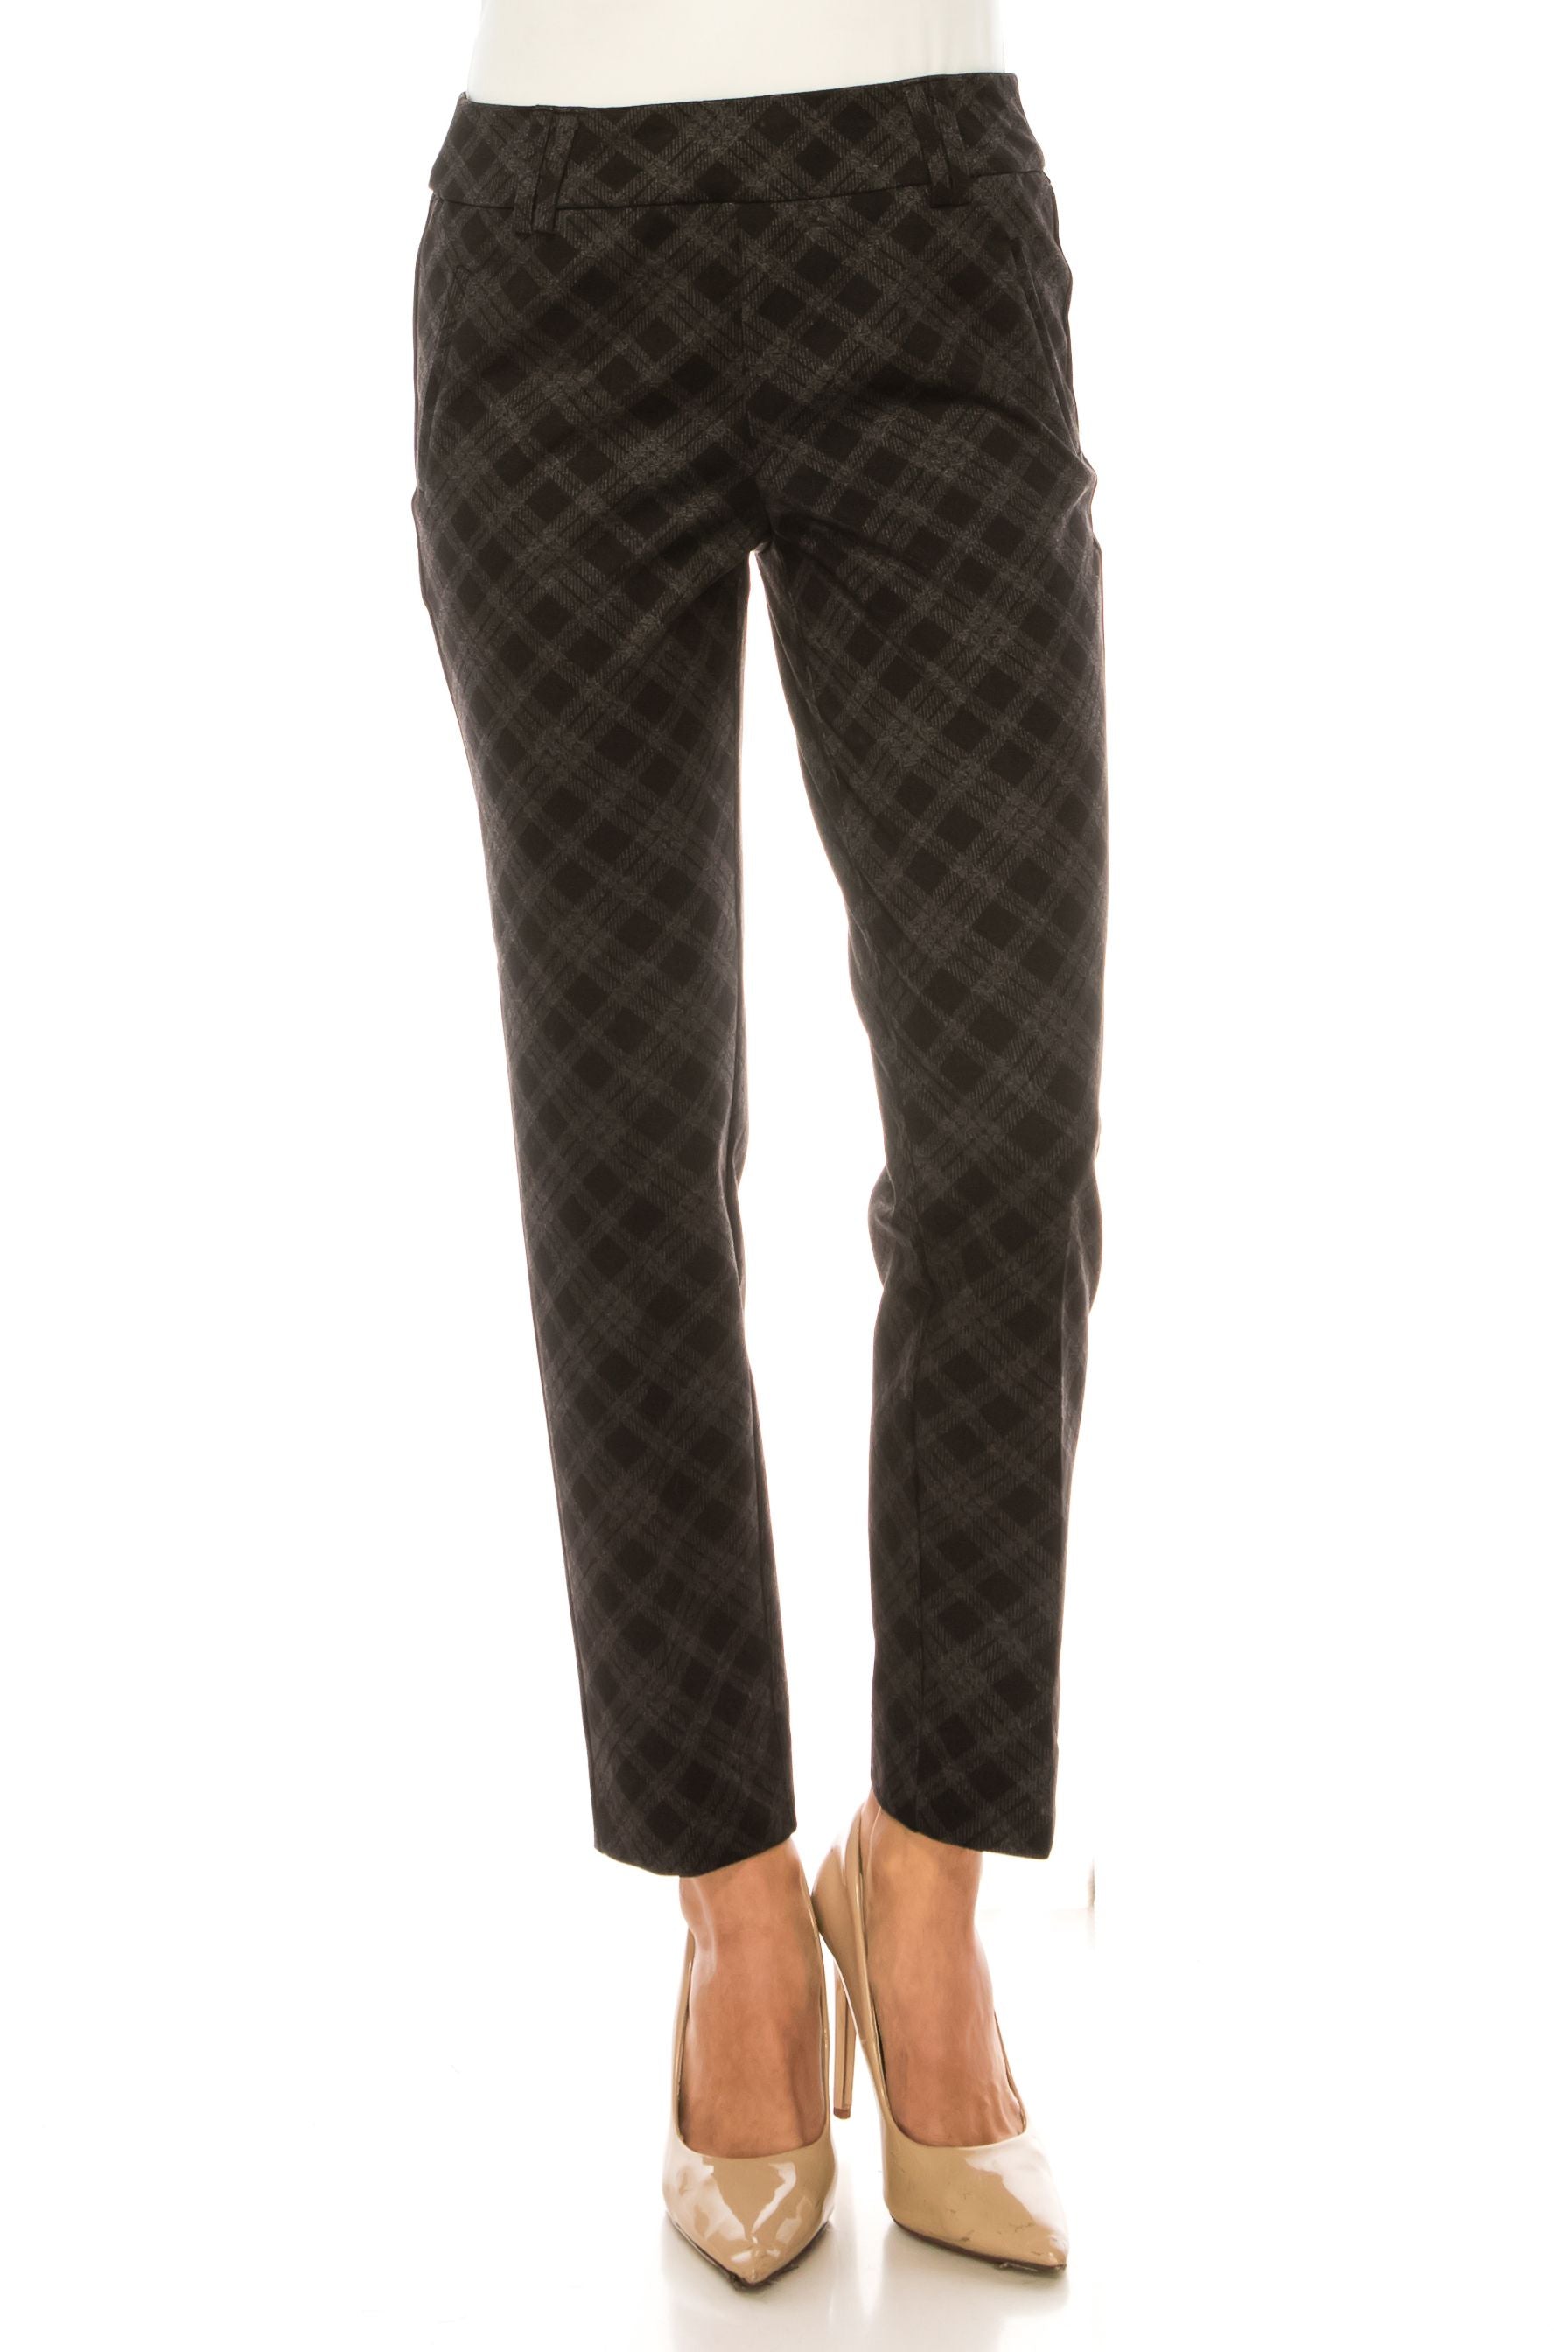 Gray Black Plaid Trousers: Perfect for any Event